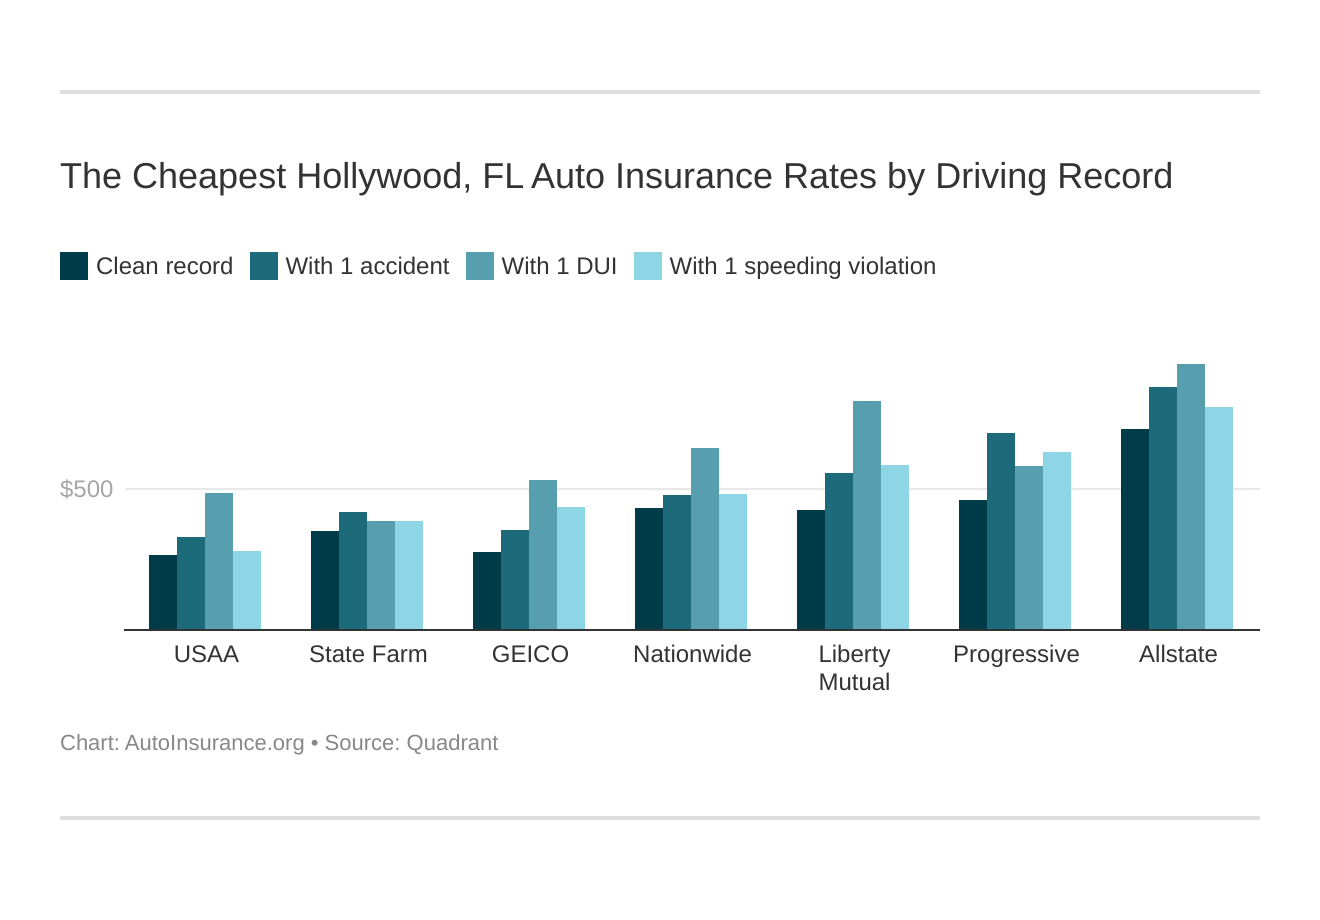 The Cheapest Hollywood, FL Auto Insurance Rates by Driving Record